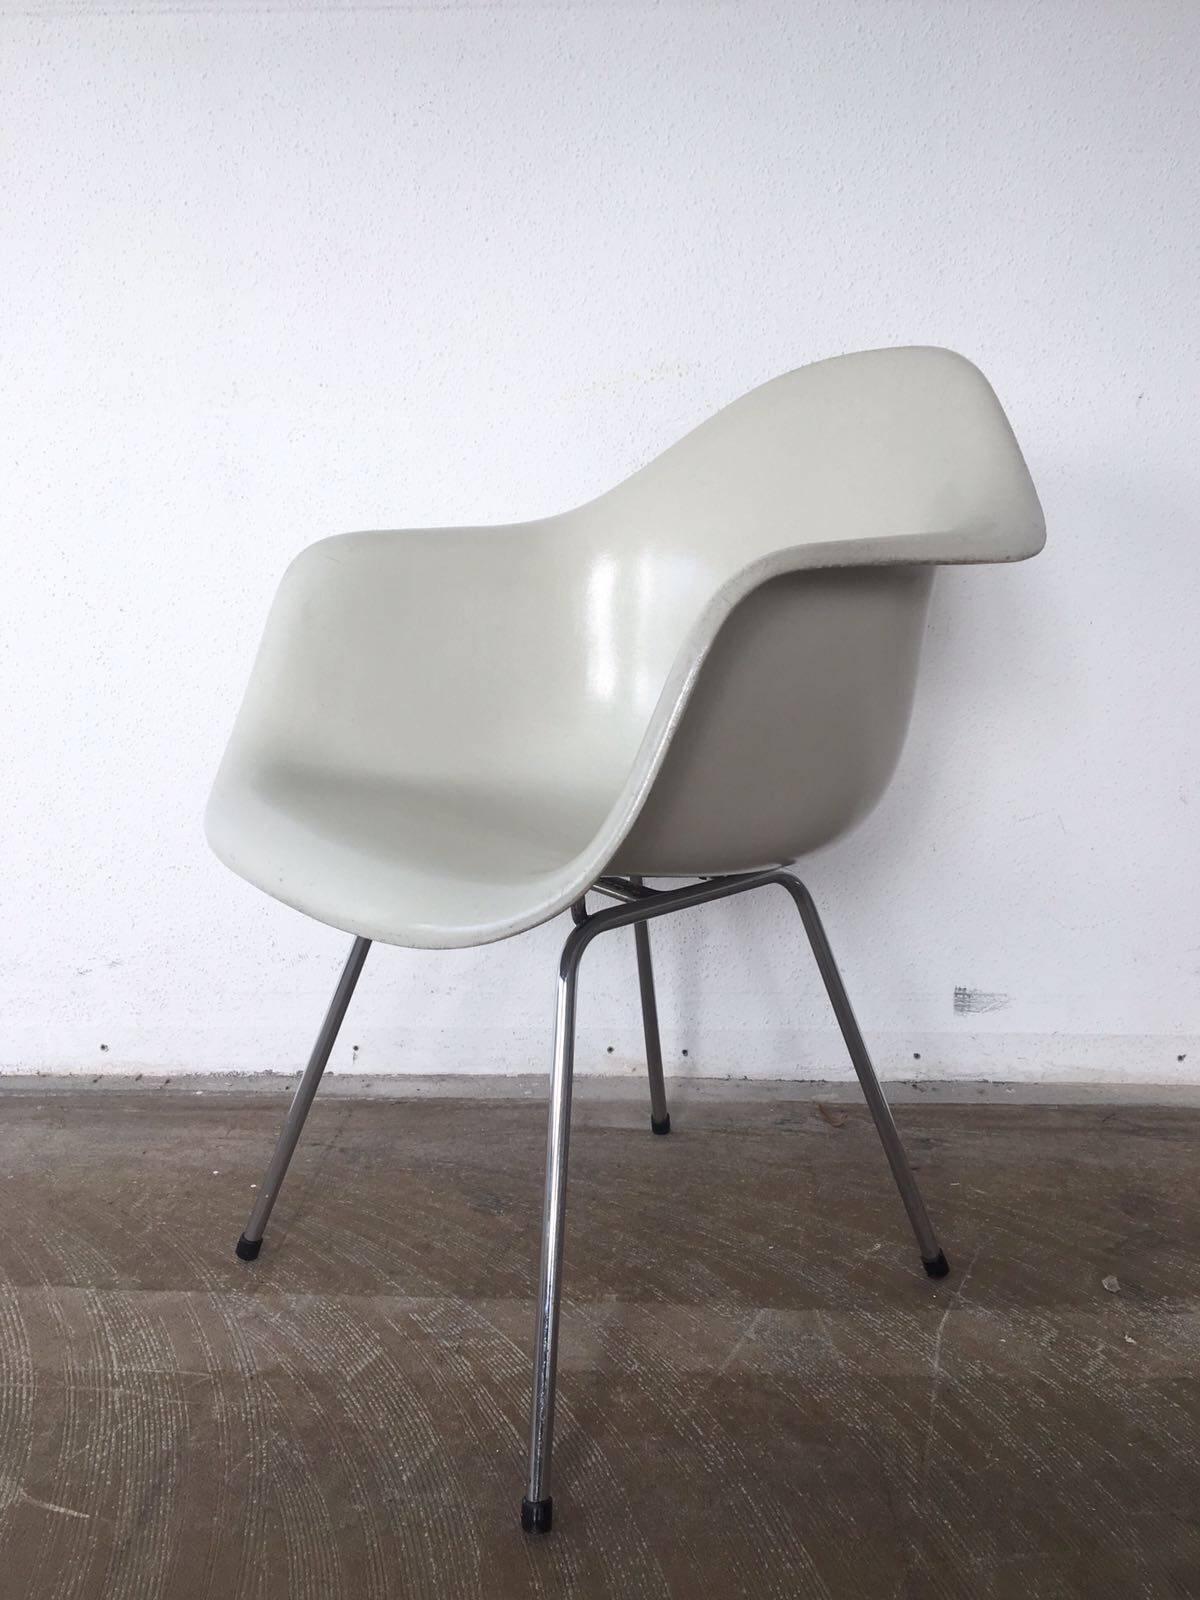 Late 20th Century Herman Miller USA Eames DAX Fiberglass Armchairs with Four-Leg Base, 1983